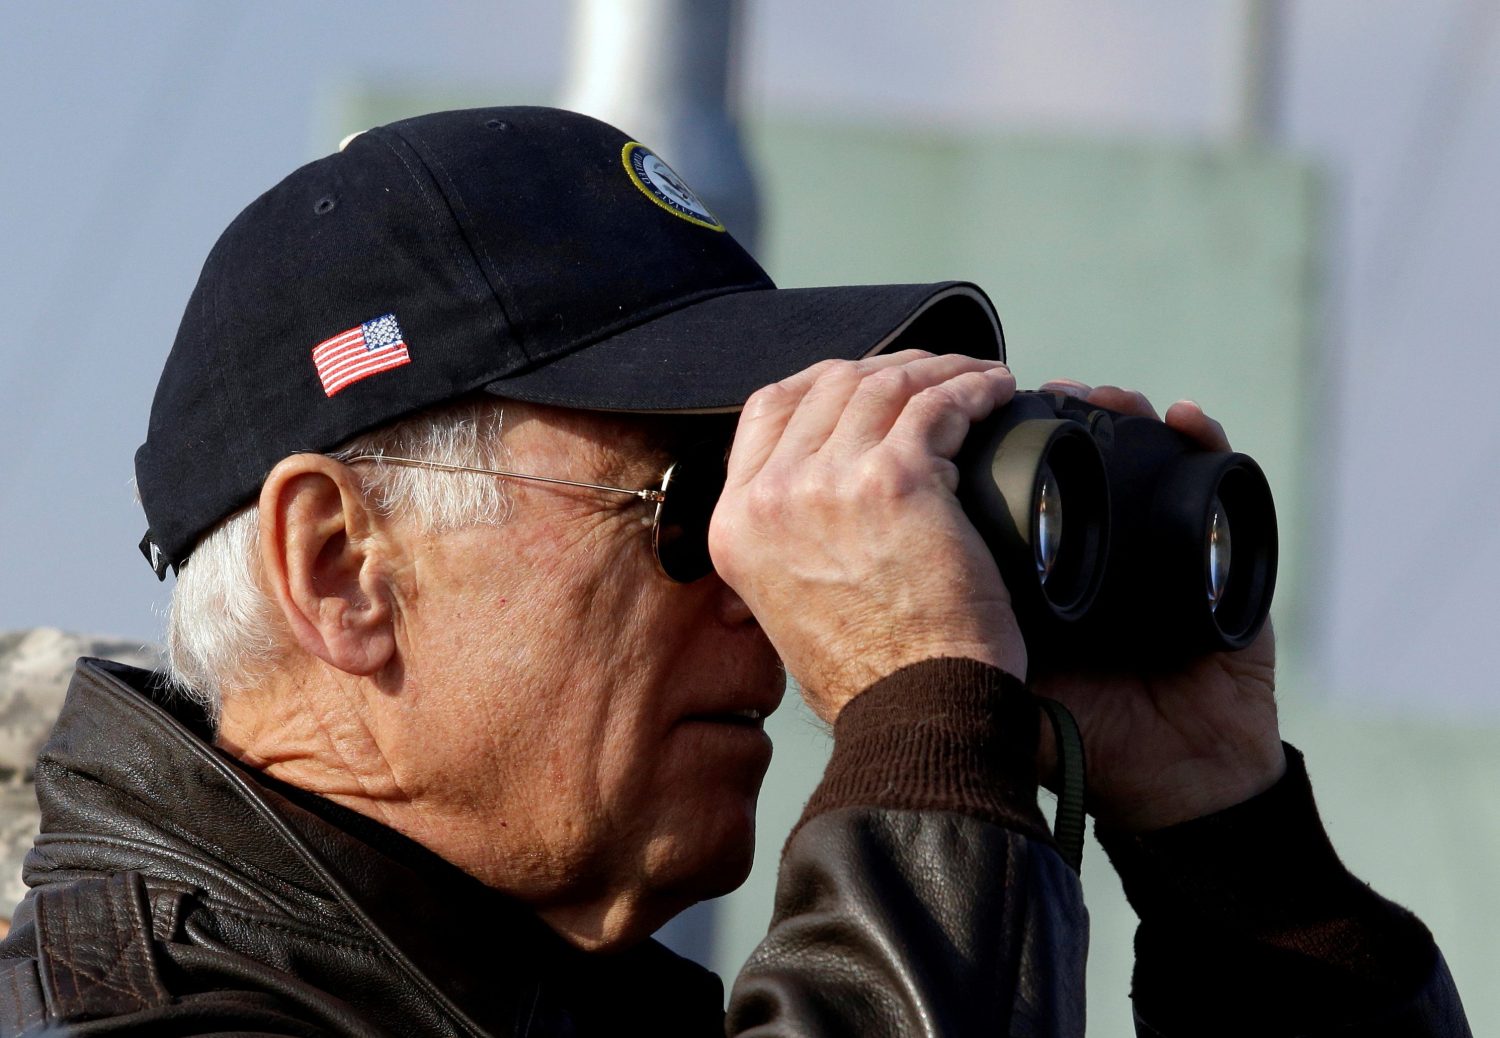 FILE PHOTO: U.S. Vice President Joe Biden looks through binoculars to see North Korea from Observation Post Ouellette during a tour of the Demilitarized Zone (DMZ), the military border separating the two Koreas, in Panmunjom, December 7, 2013. REUTERS/Lee Jin-man/Pool/File Photo